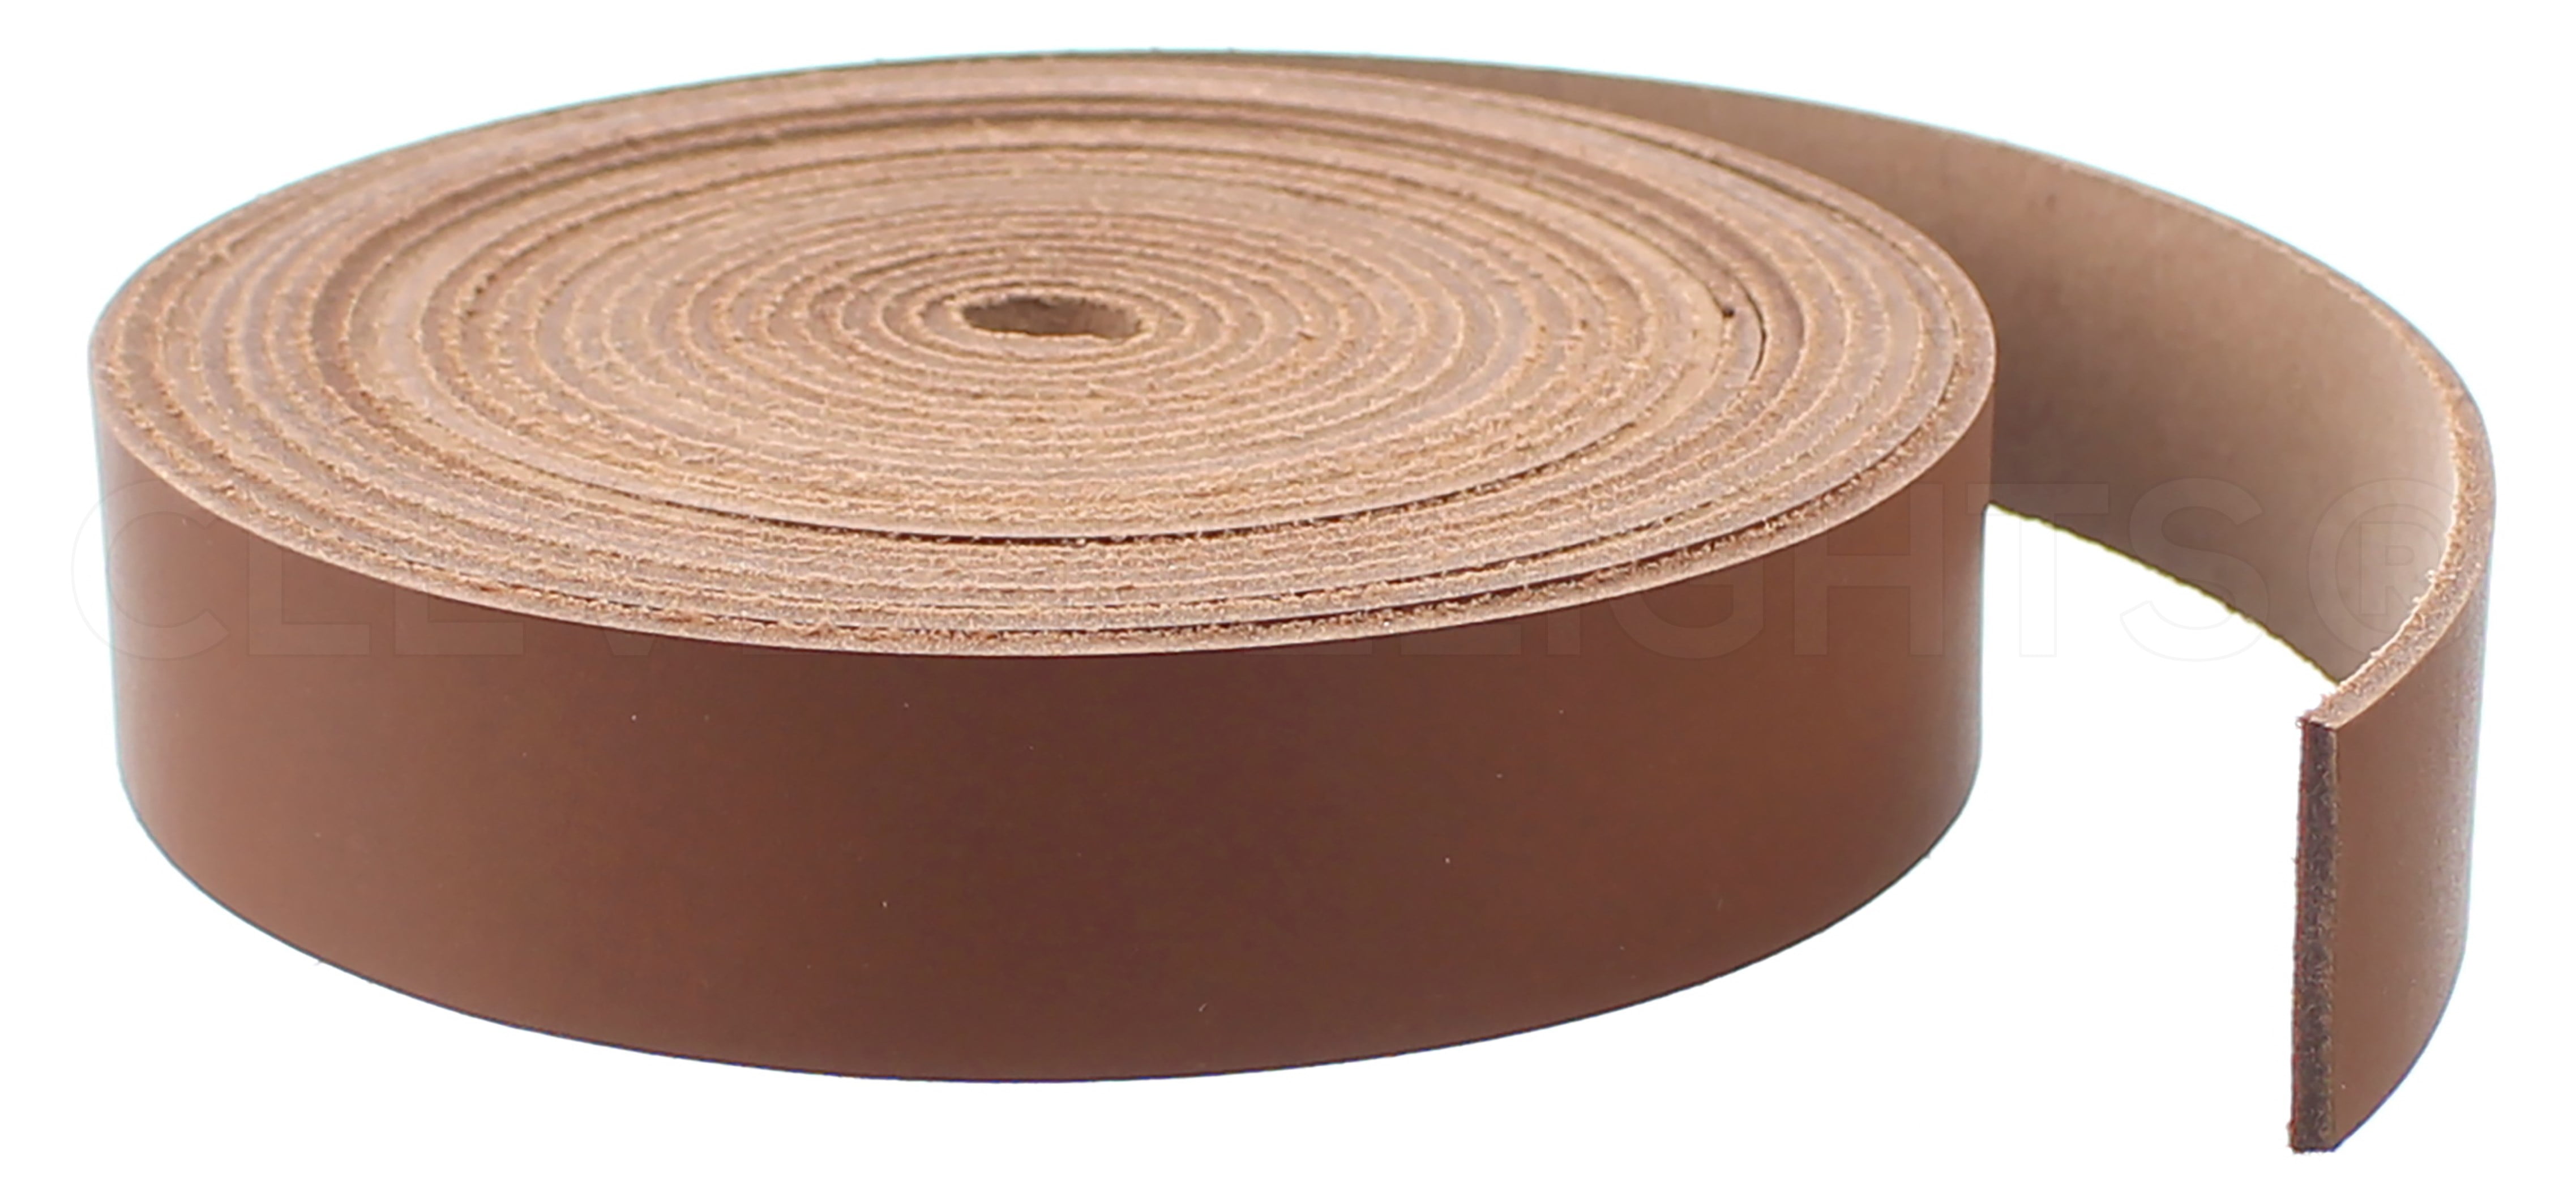 Fan&Ran Genuine Leather Strip 1 1/2 inch Wide 64 Inches Long for DIY Craft Projects, 1.8-2mm Thick, Coffee Brown